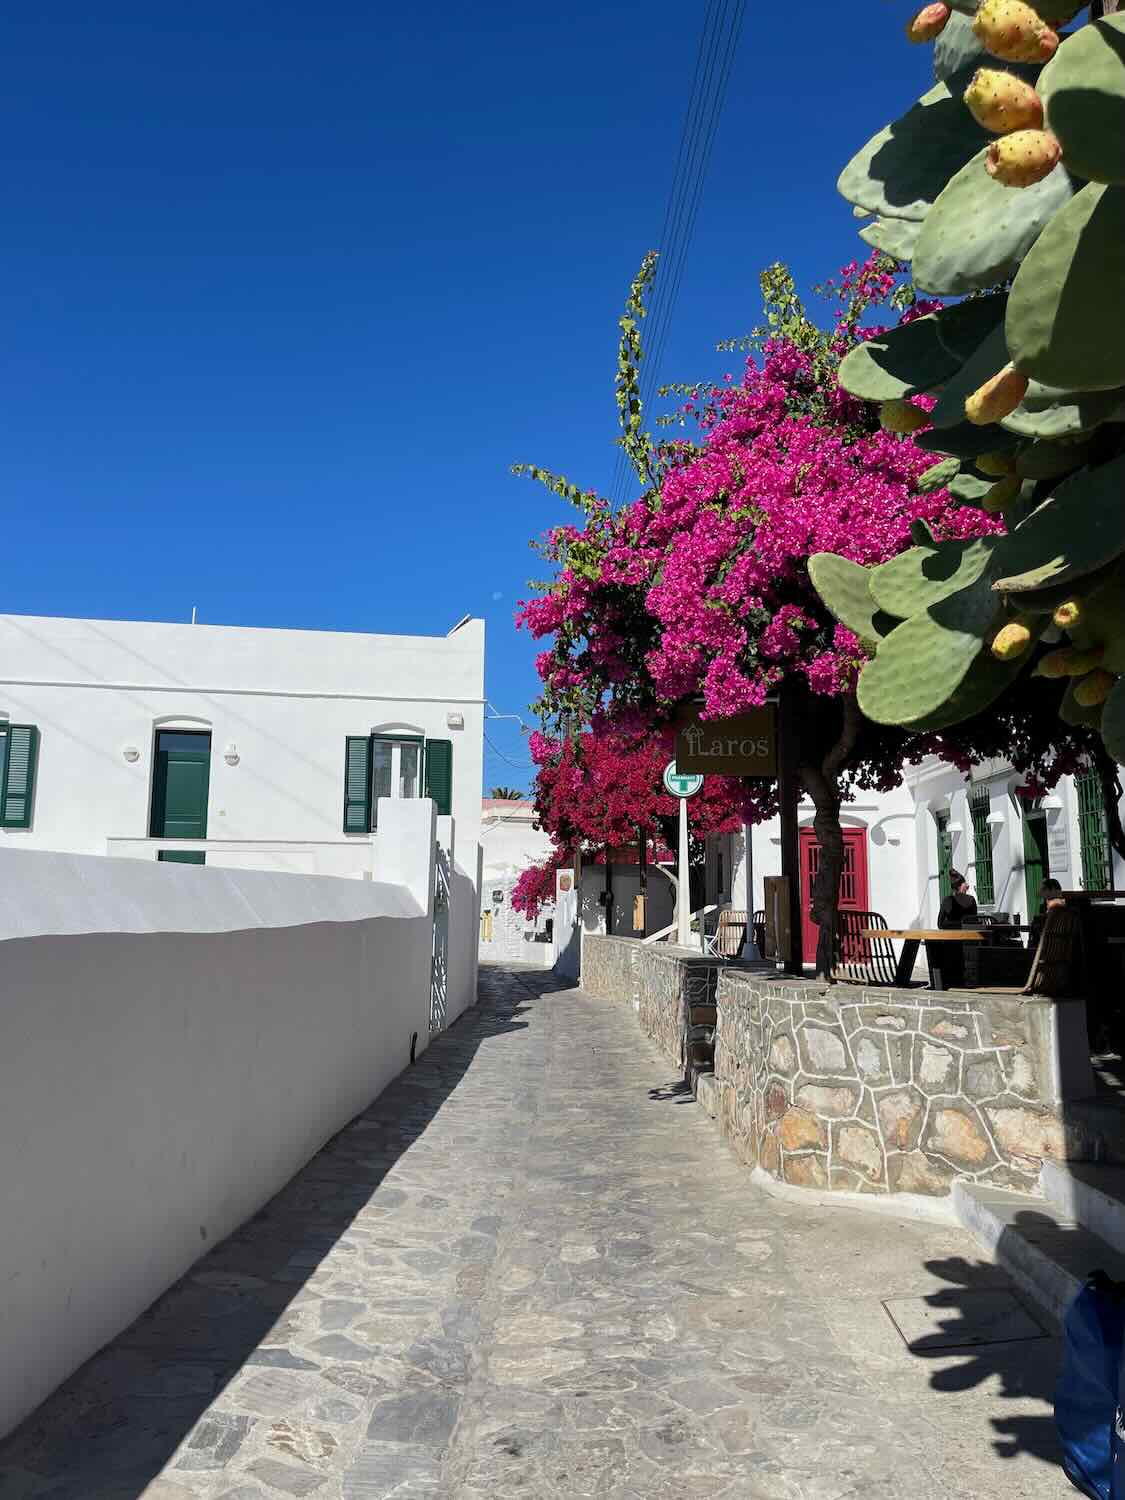 A narrow alley lined with traditional white houses and vibrant pink bougainvillea in Sifnos, showcasing the charm of the island's villages